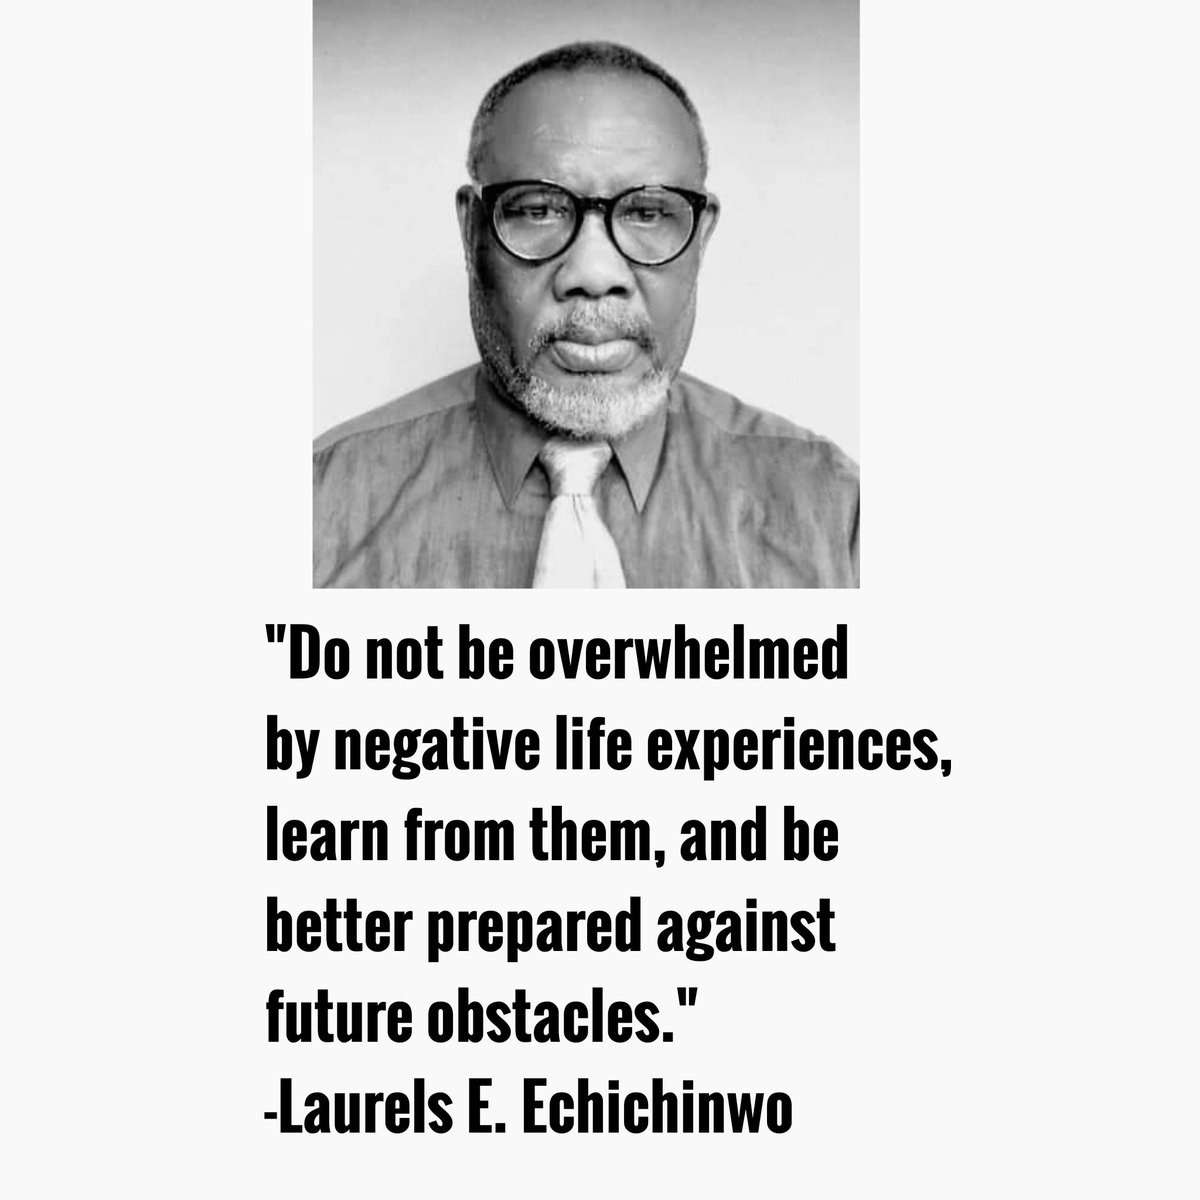 'Do not be overwhelmed by negative life experiences, learn from them, and be better prepared against future obstacles.' -Laurels E. Echichinwo 
#laurelsechichinwoinspirationalquotes